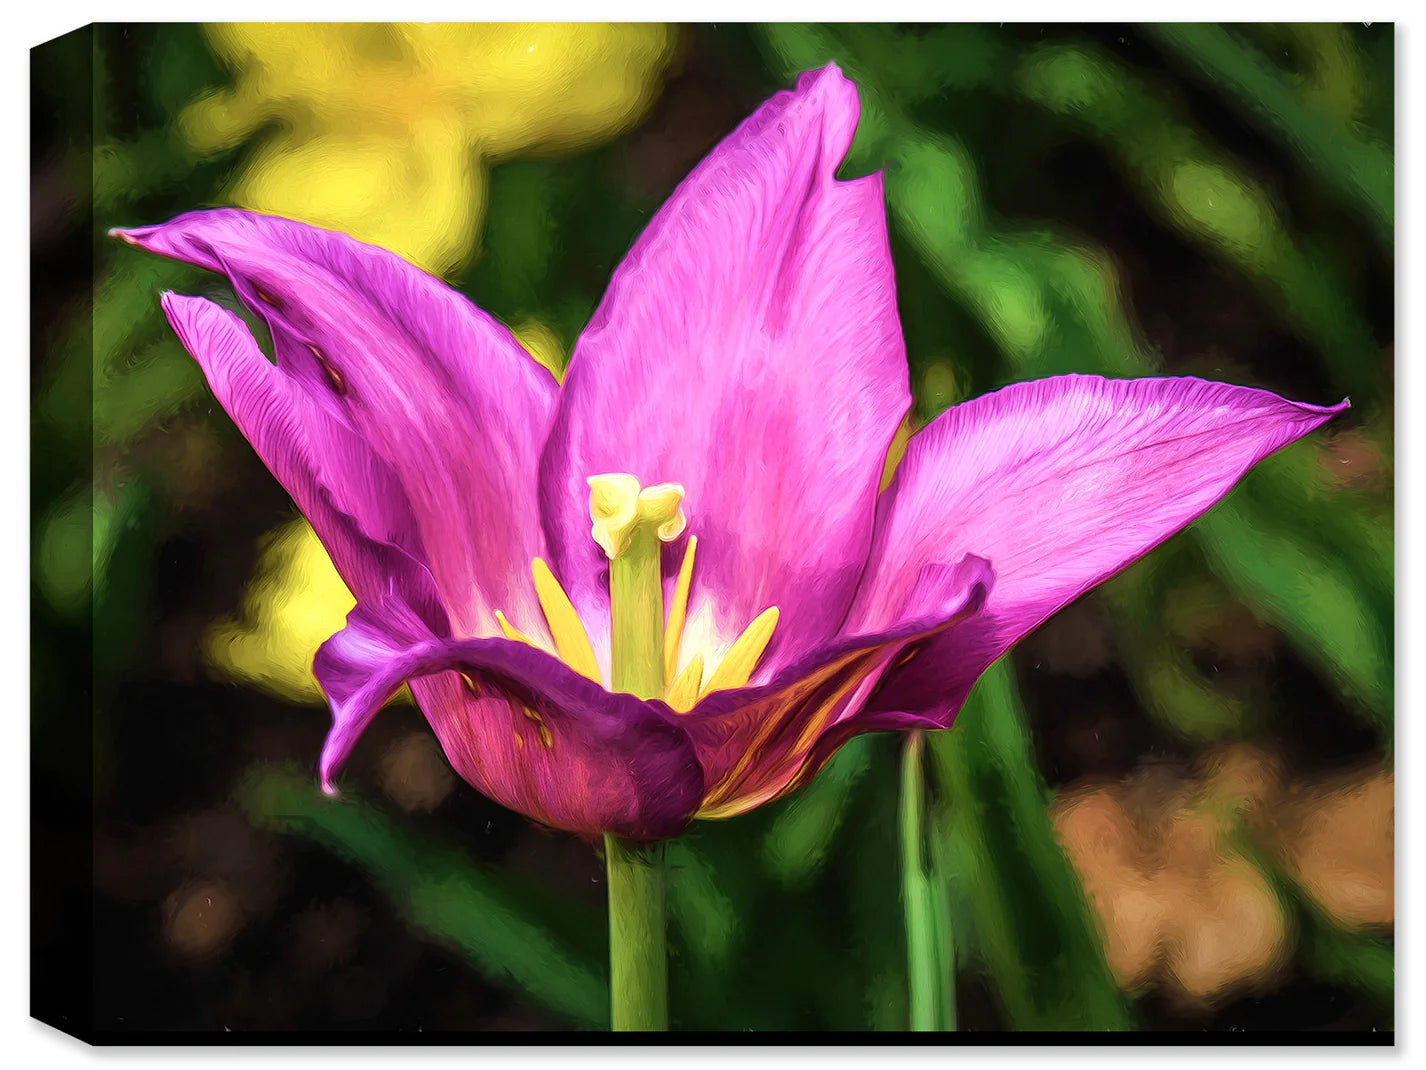 Photograph of a Tulip